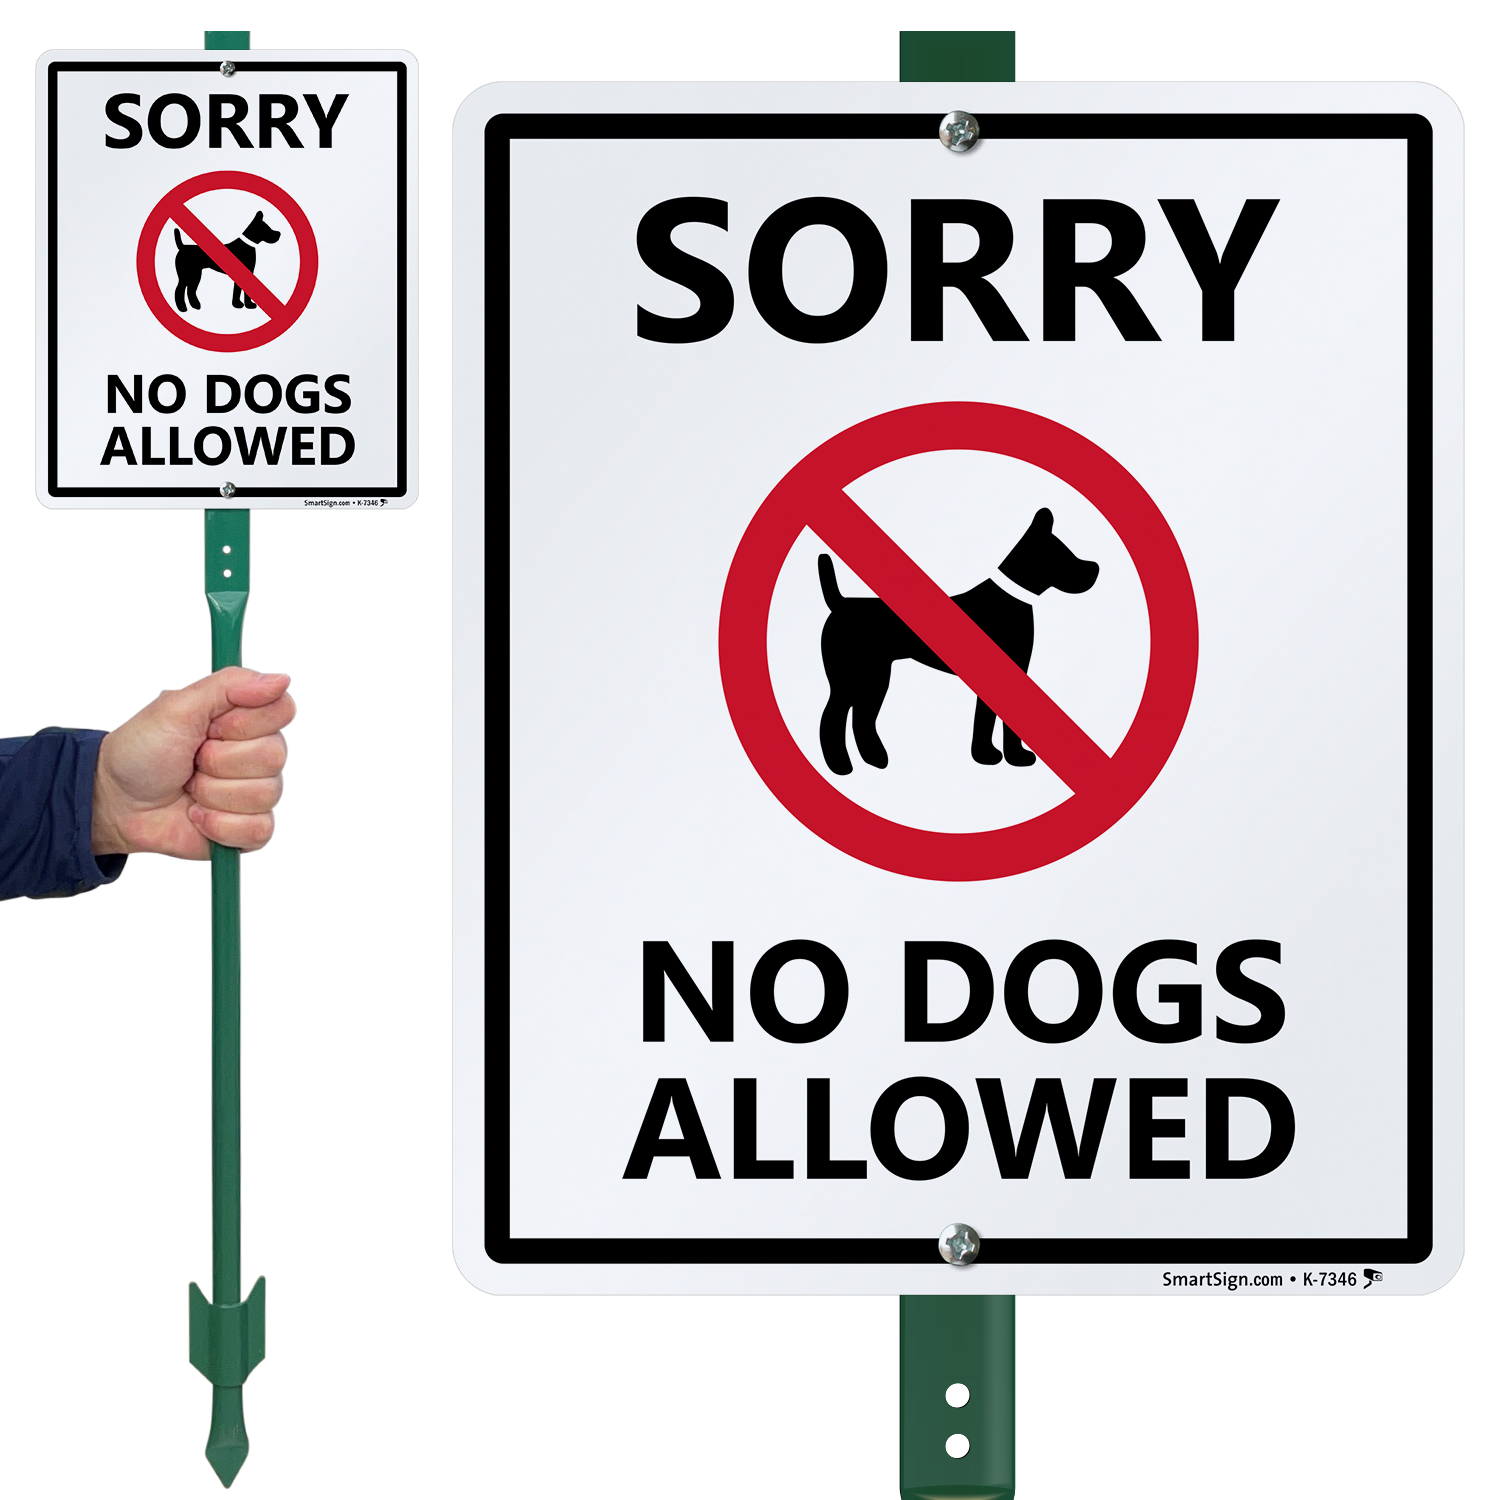 Dogs allowed. Ноу сори. No Dogs allowed. No Dogs.